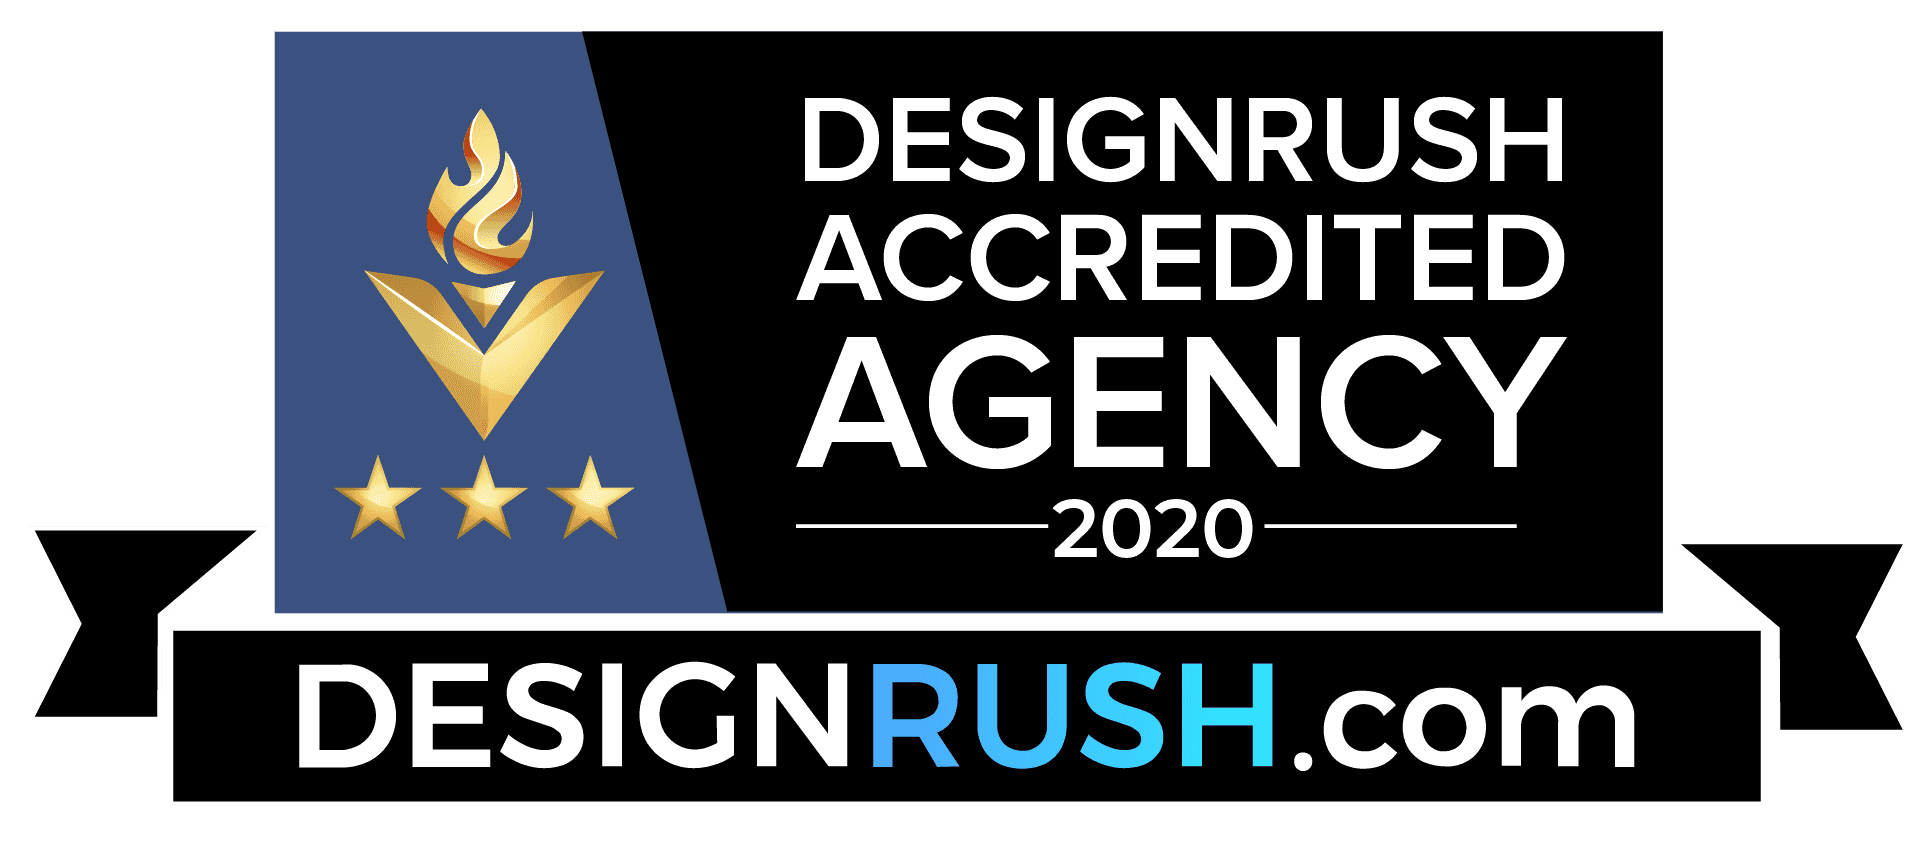 Accredited Agency 2020